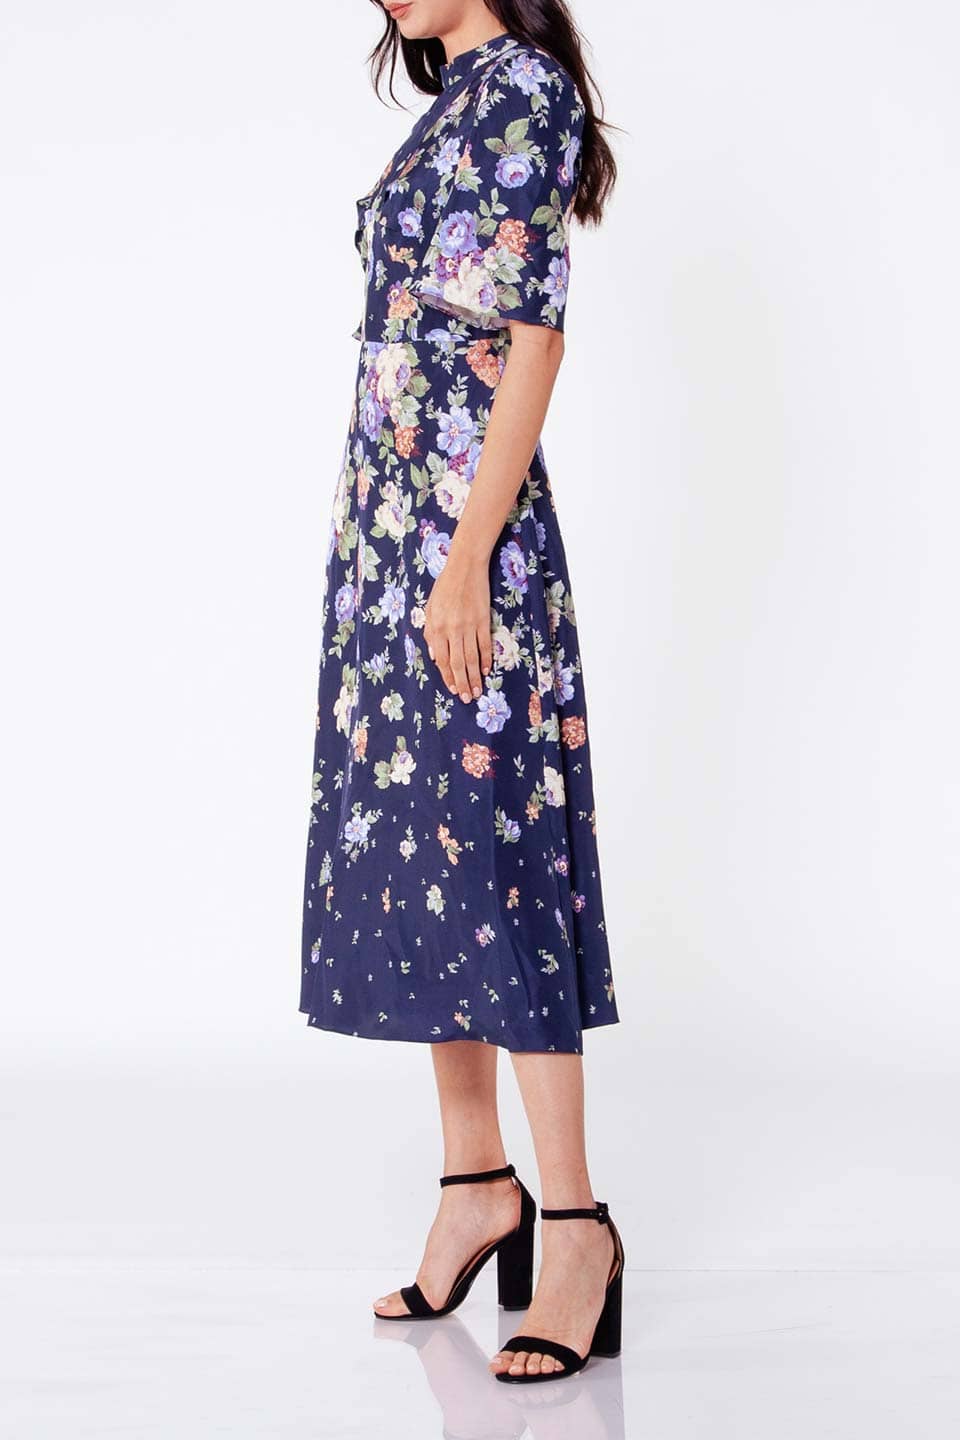 Thumbnail for Product gallery 5, Midi dress from fashion designer Vilshenko, in blue color with floral print. product view from side